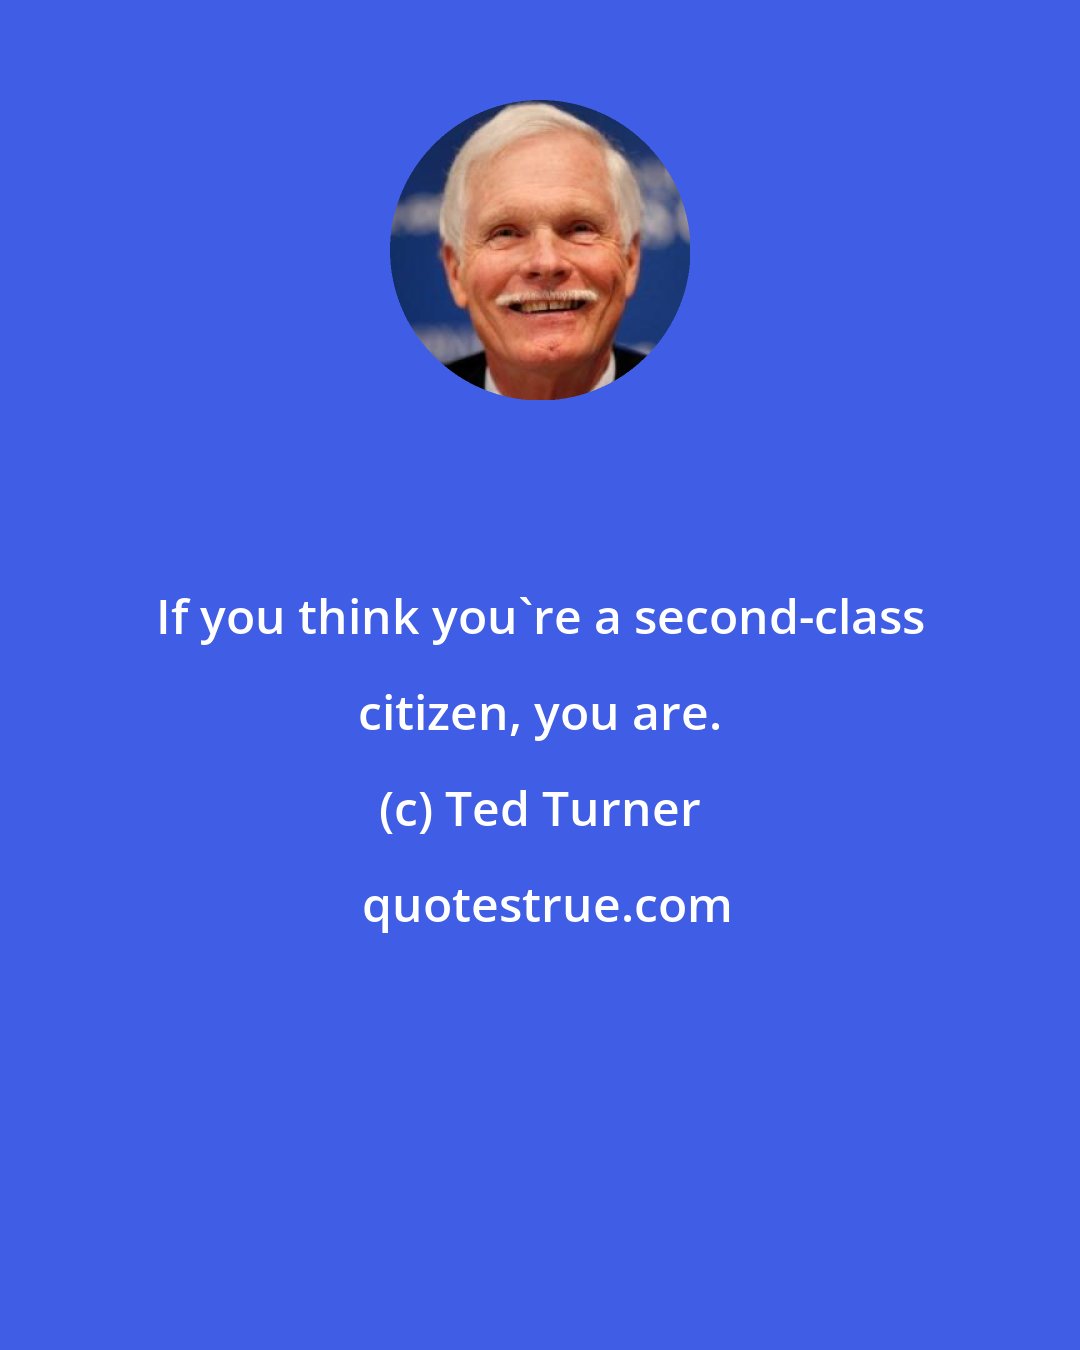 Ted Turner: If you think you're a second-class citizen, you are.